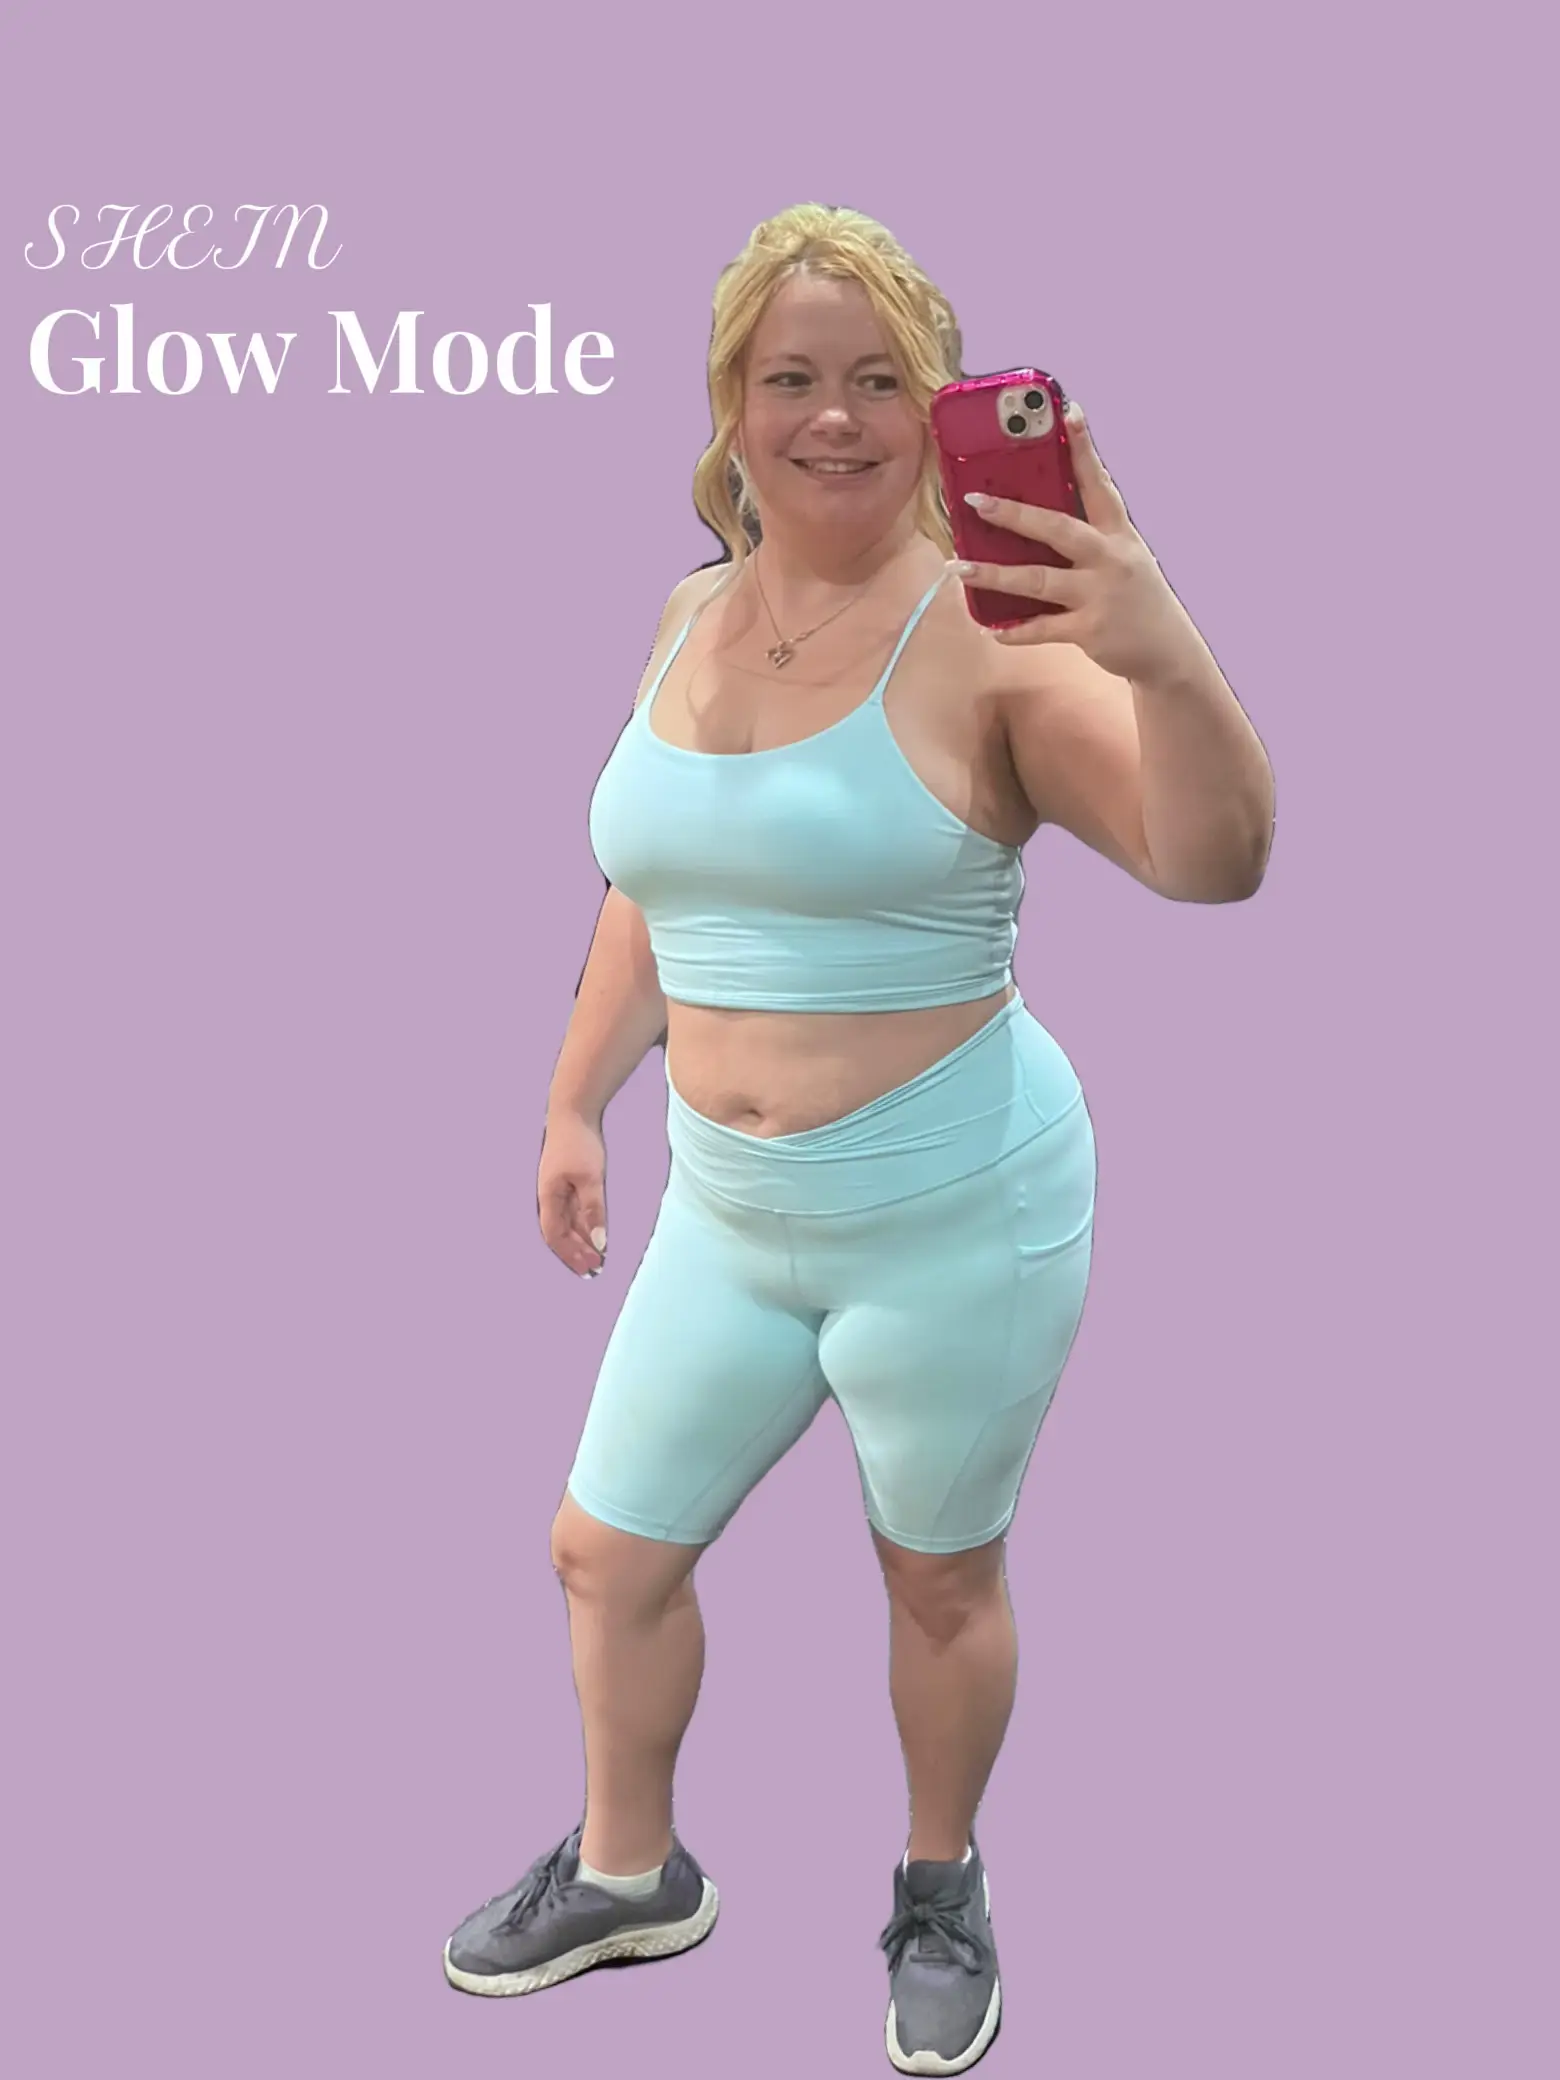 Shein haul from their activewear line Glowmode 💛 the softest pieces @